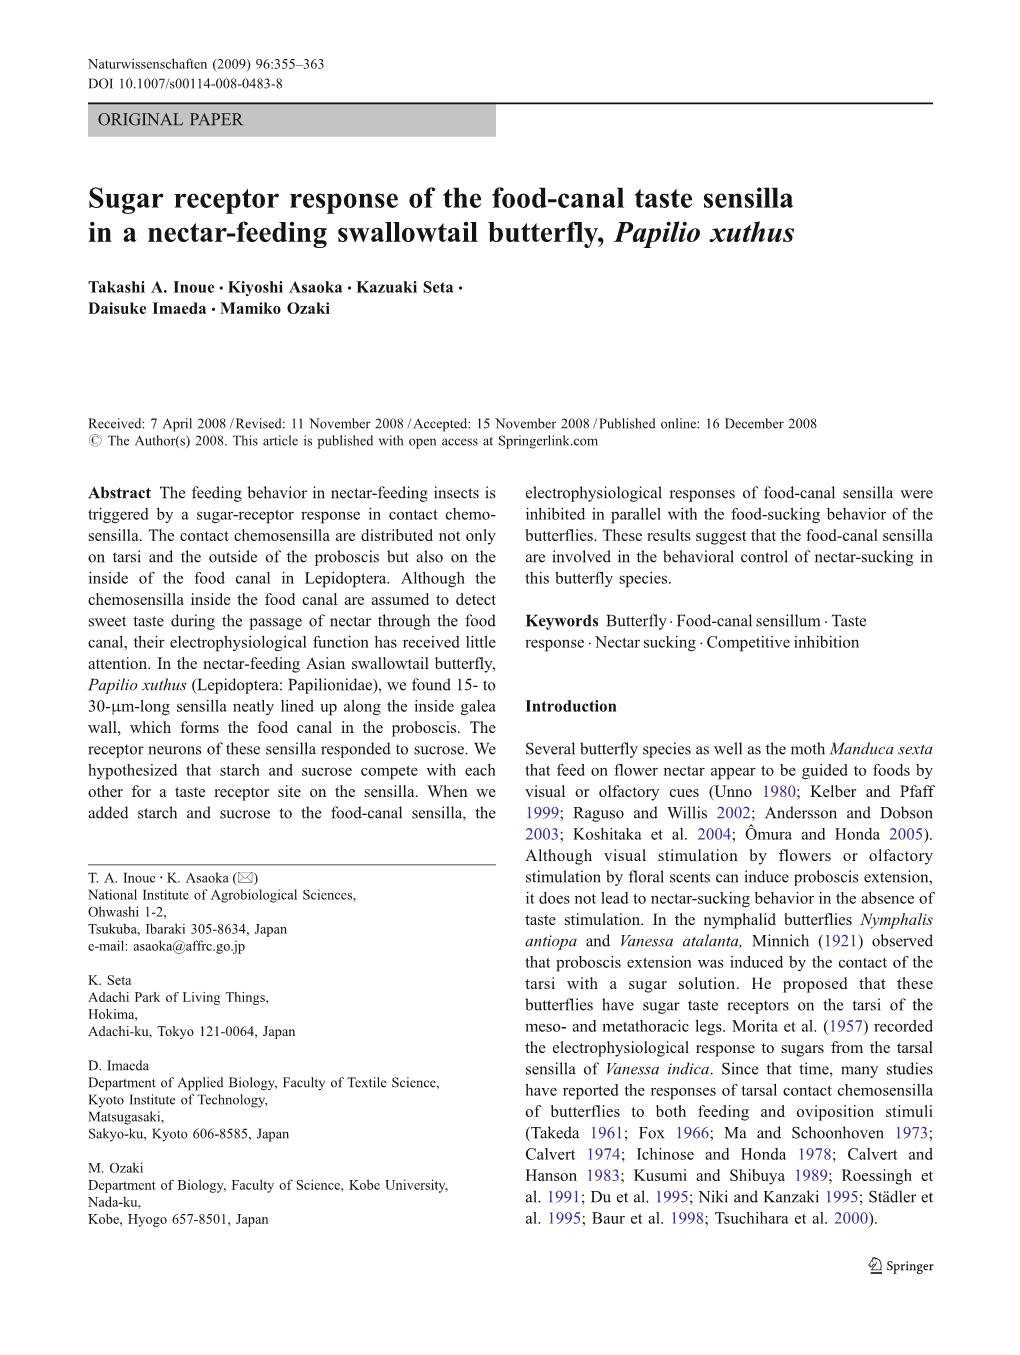 Sugar Receptor Response of the Food-Canal Taste Sensilla in a Nectar-Feeding Swallowtail Butterfly, Papilio Xuthus